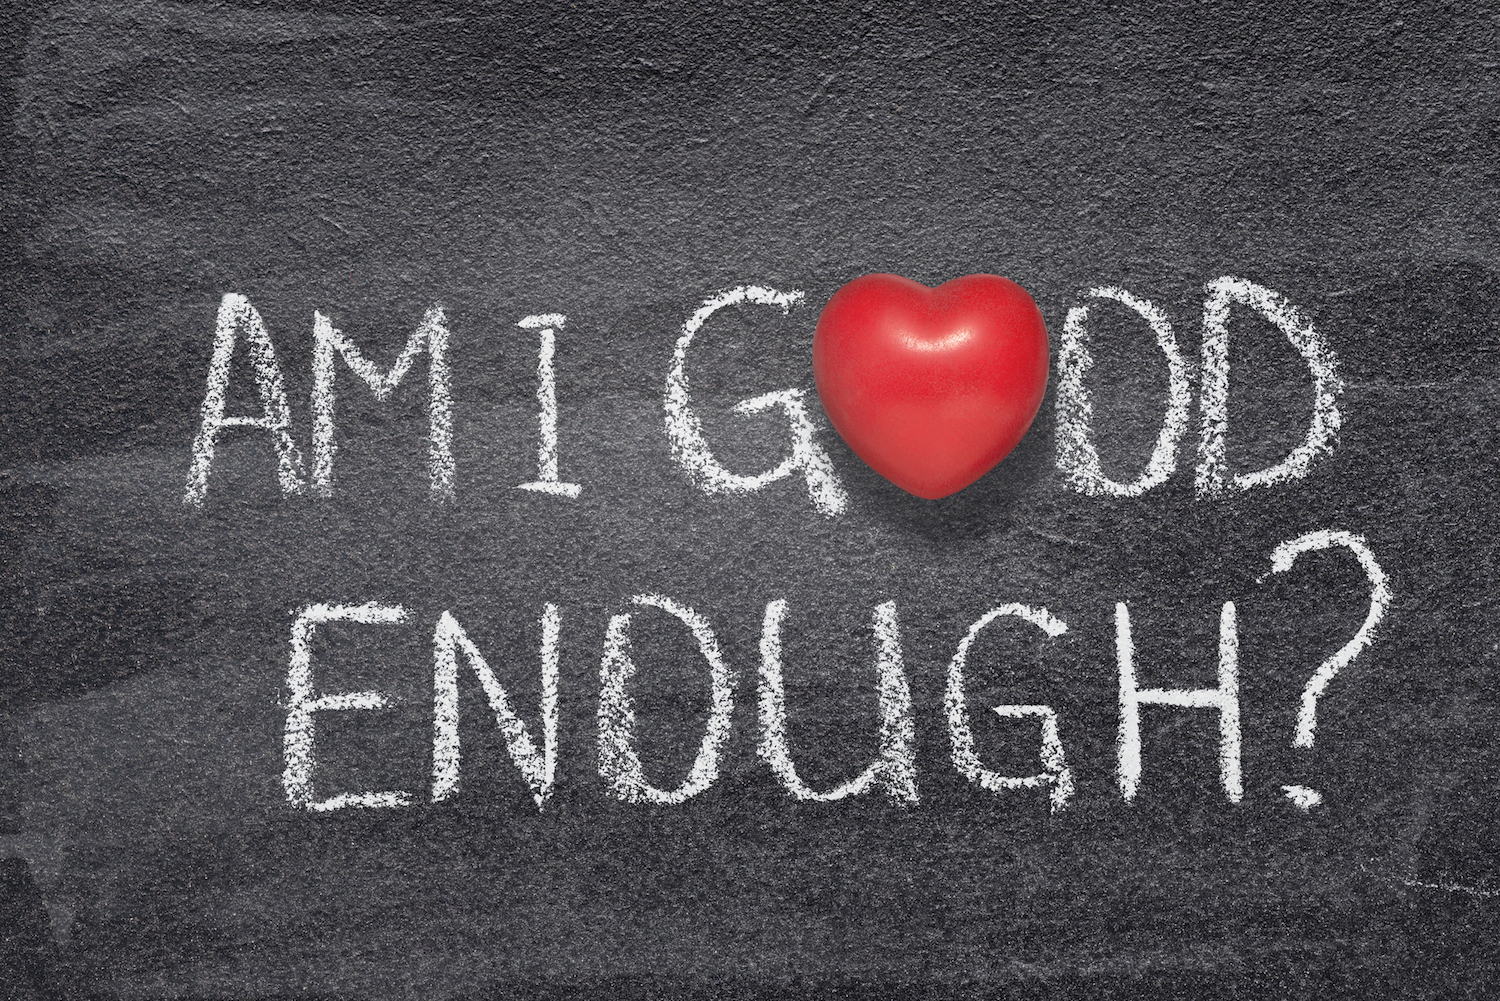 am I good enough question handwritten on chalkboard with red heart symbol